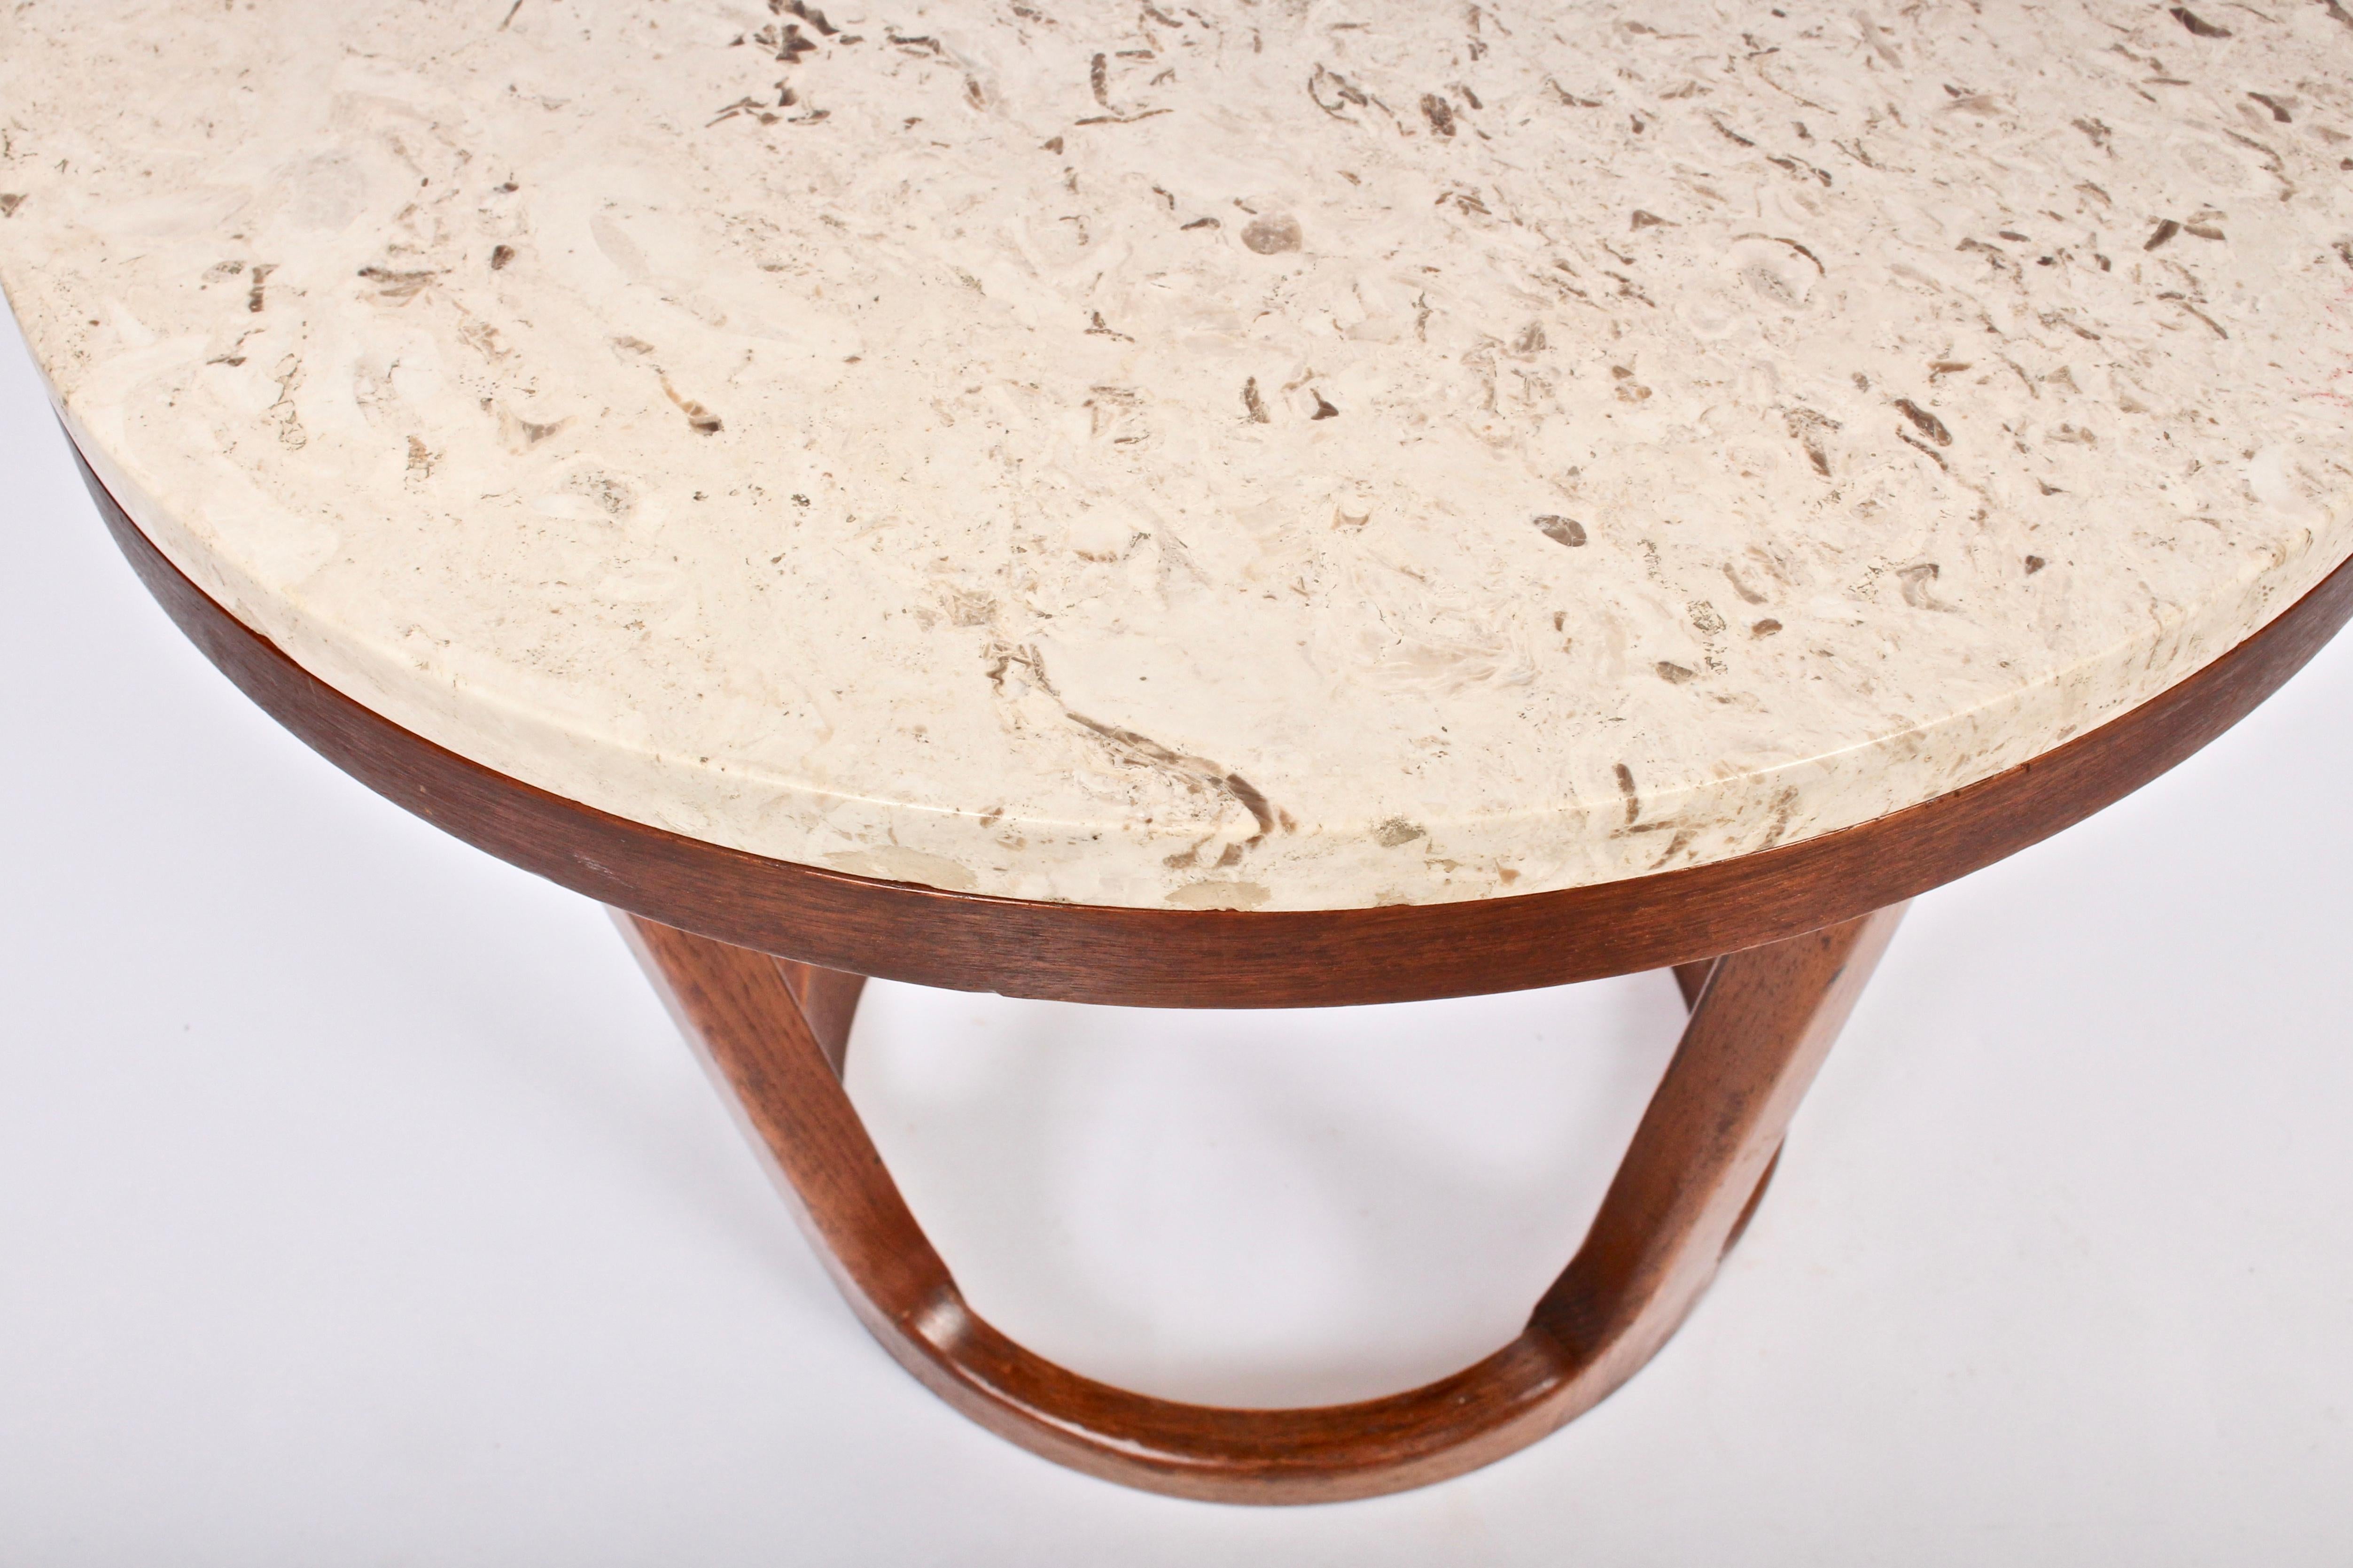 Mid-20th Century Adrian Pearsall Style Lane Furniture Co. Travertine & Walnut Occasional Table